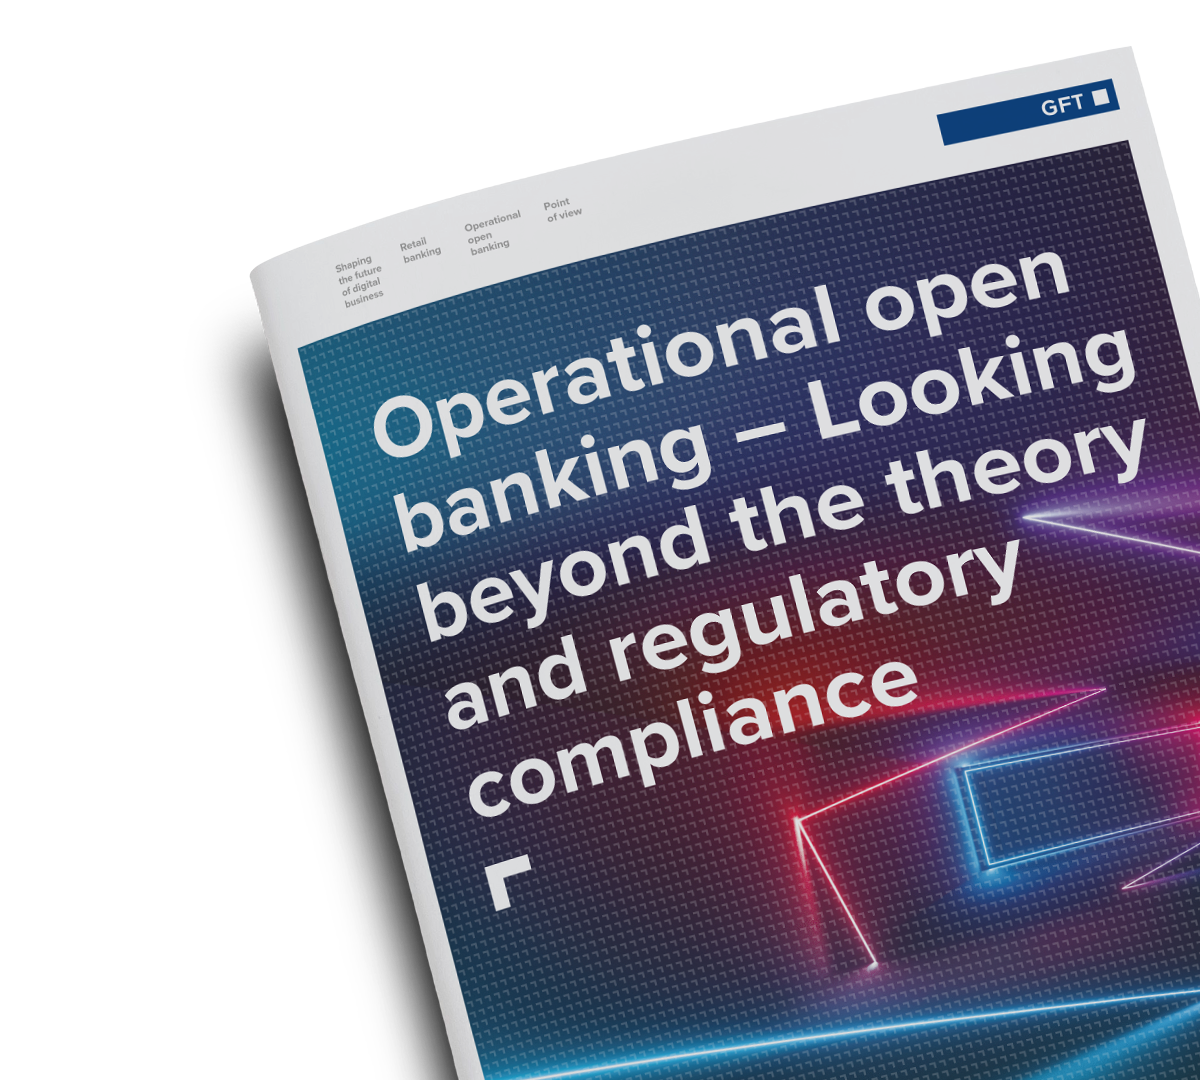 Thought leadership: Operational open banking - Looking beyond the theory and regulatory compliance